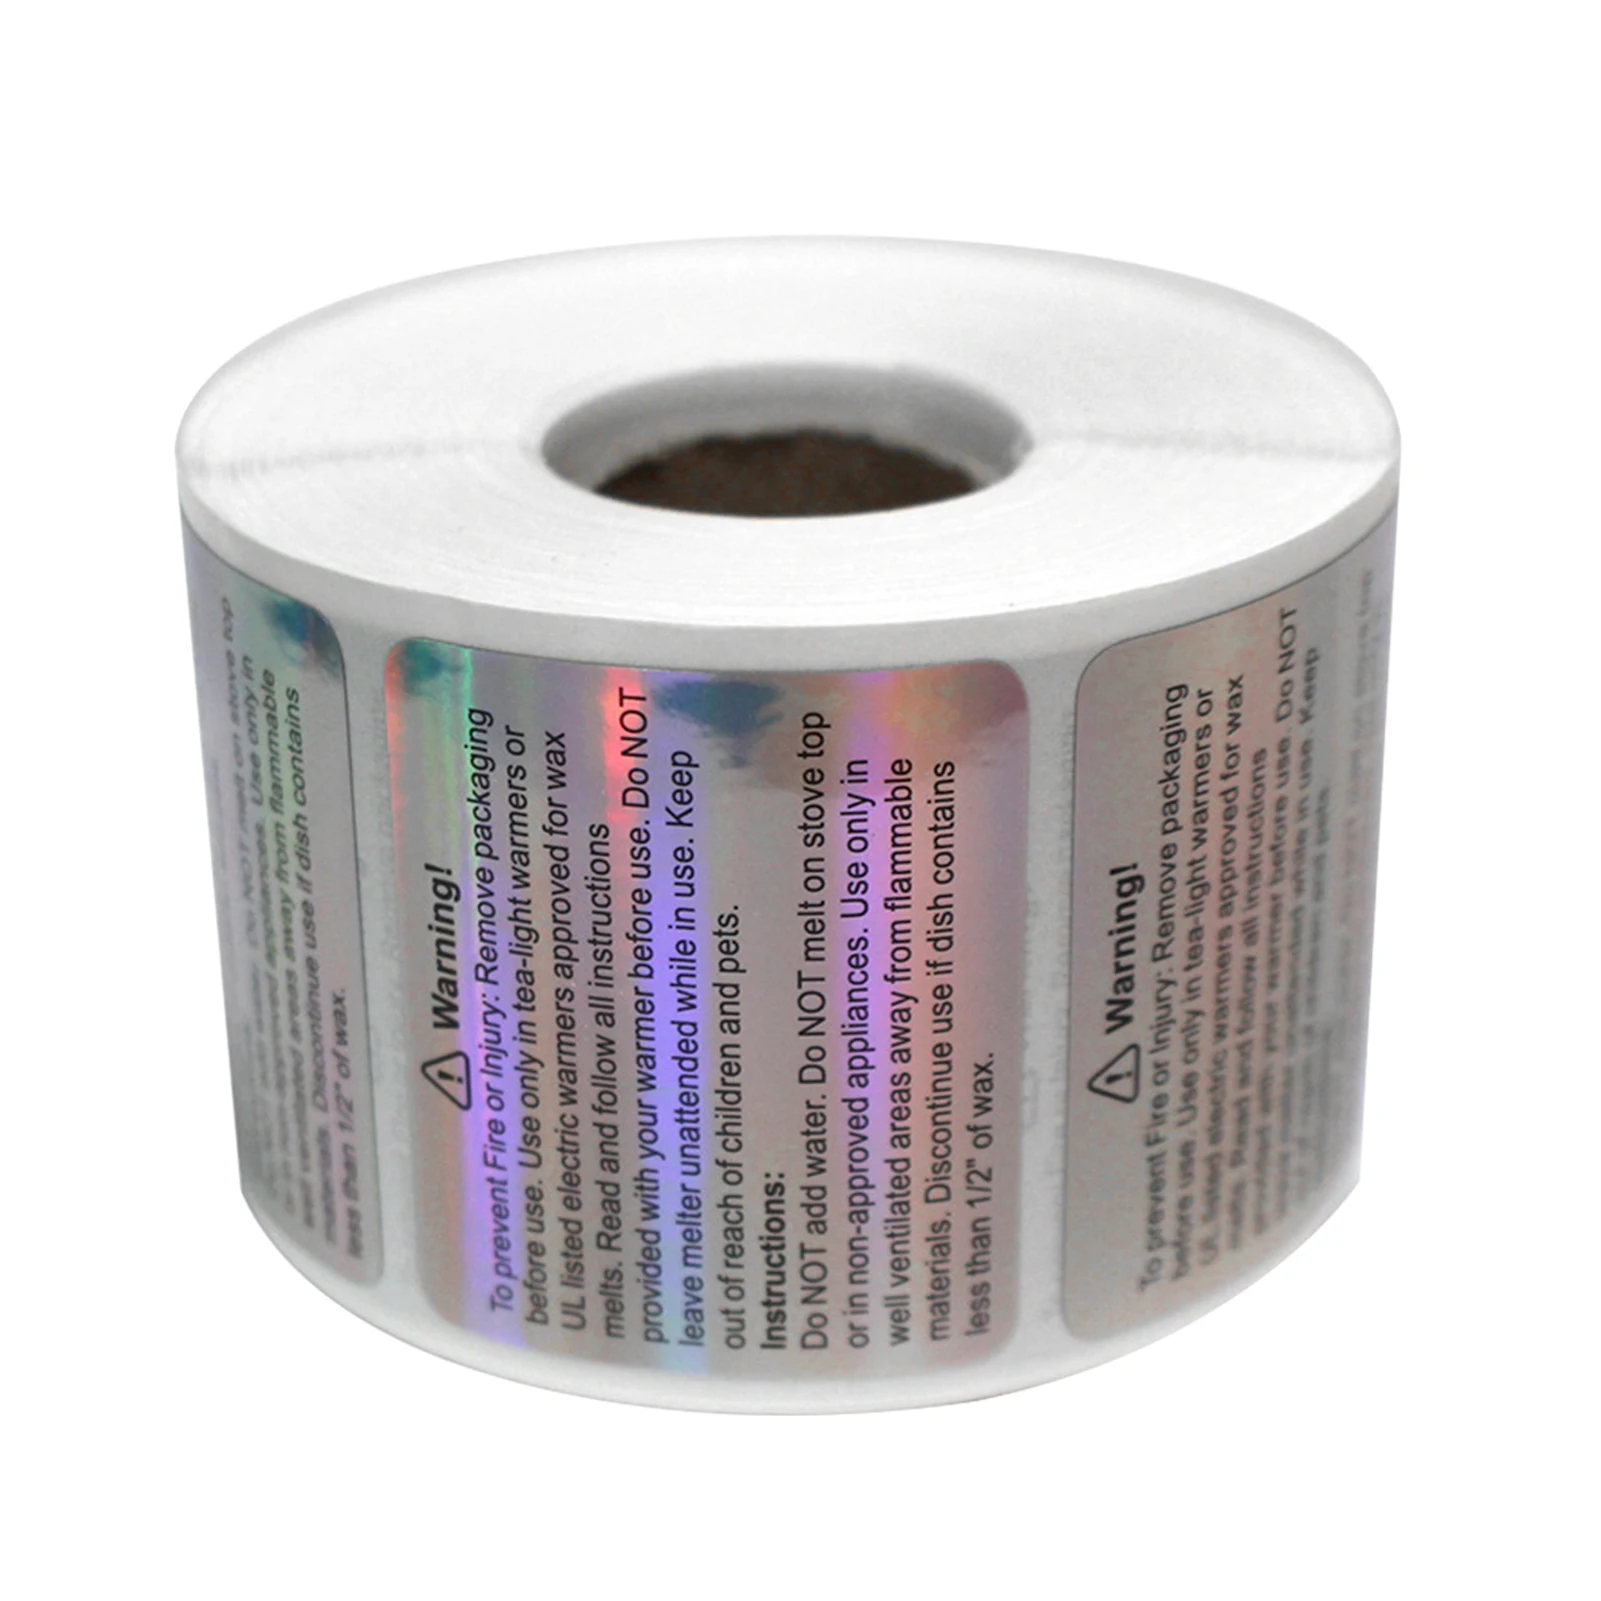 600pcs/roll Accessories Safety Sticker Candle Warning Label Oilproof Jar Self AdhesiveMelting 1.8x1.5 Inch Vow Waterproof